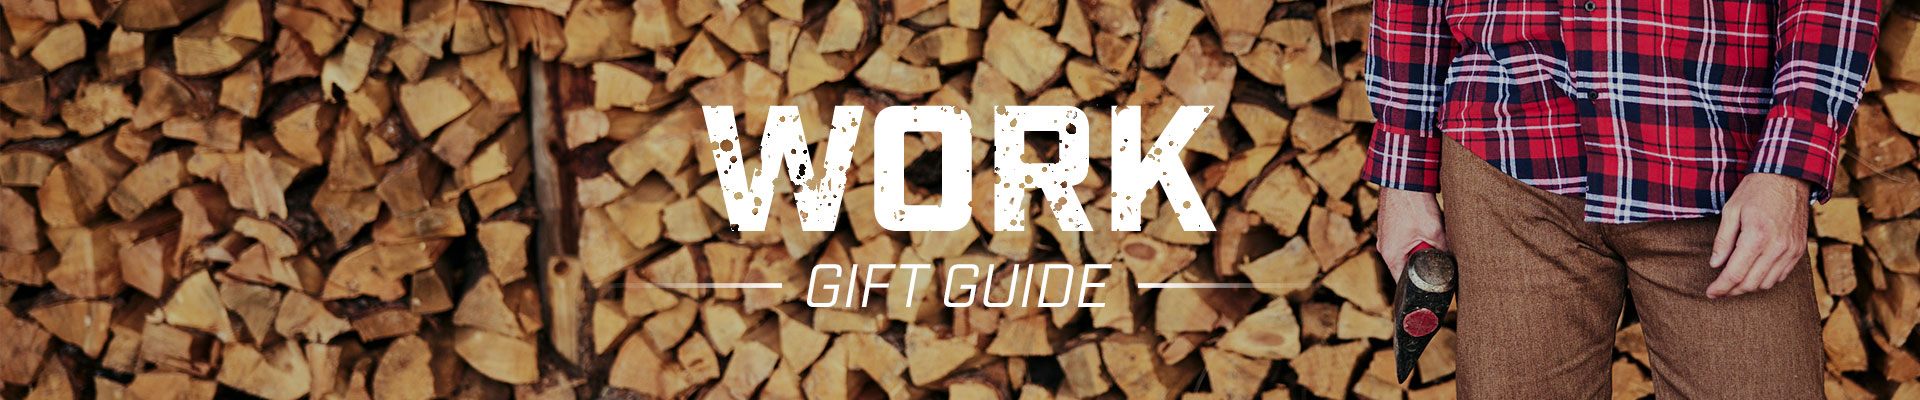 Work Gift Guide